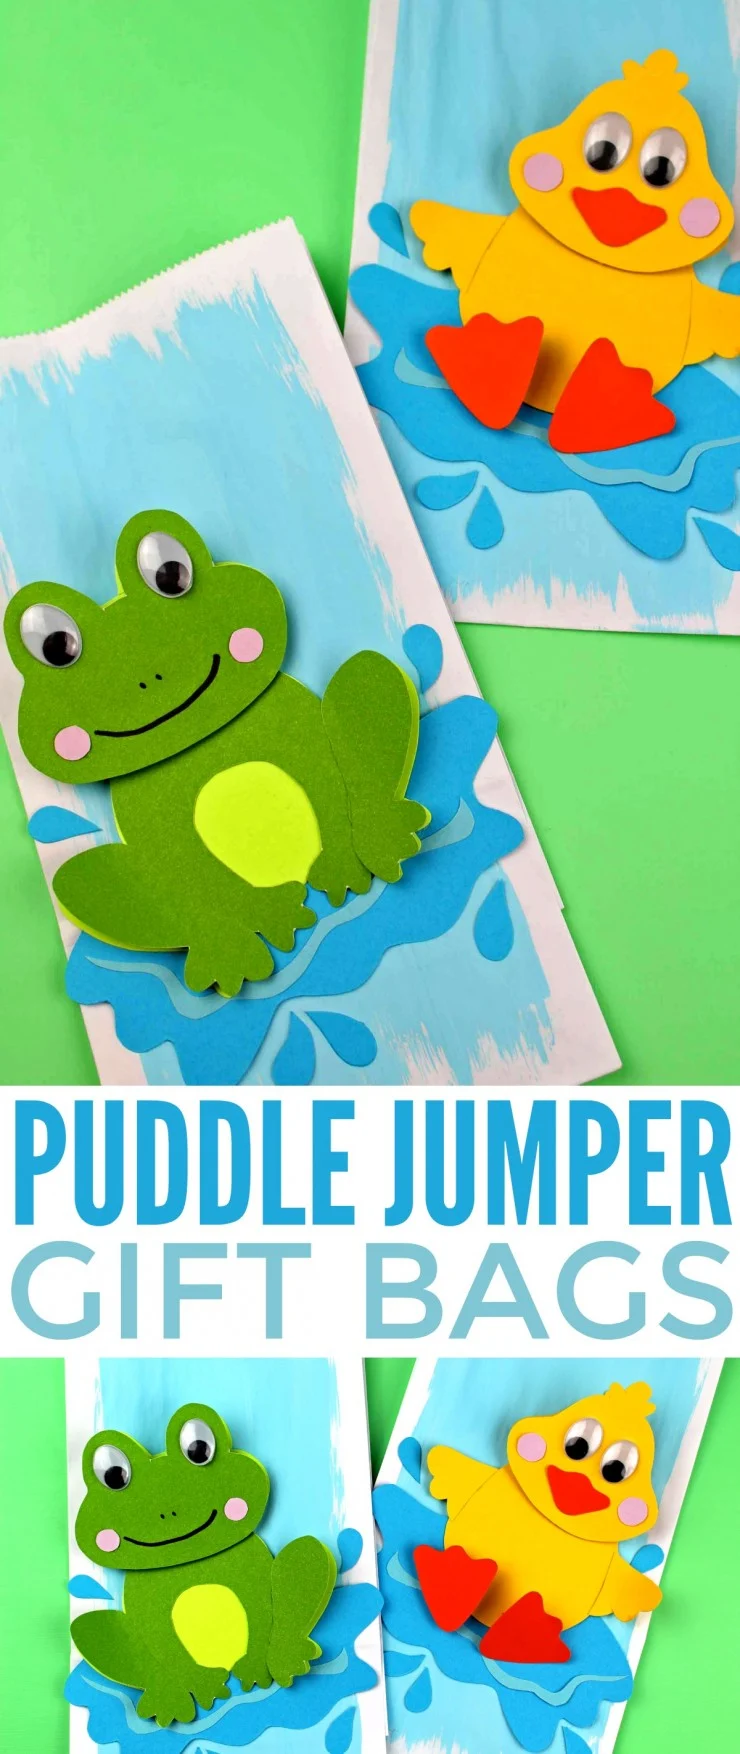 These Puddle Jumper Gift Bags make for adorable handmade gift bags that are perfect for small baby shower gifts or birthday party loot bags! These adorable diy gift bags are easy to make too thanks to the free printable template!